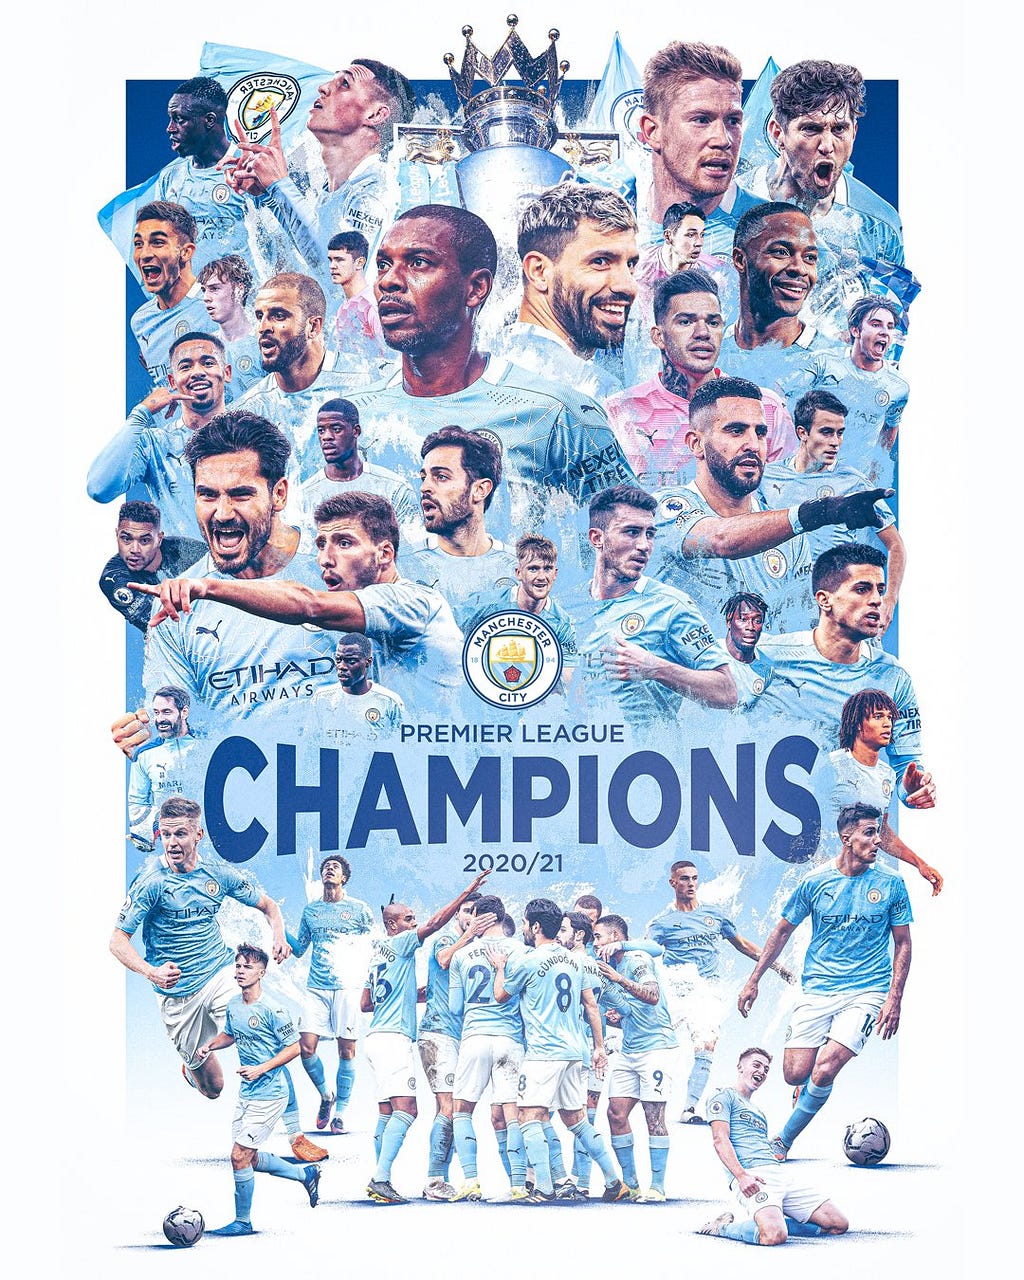 Manchester City are Premier League Champions once again